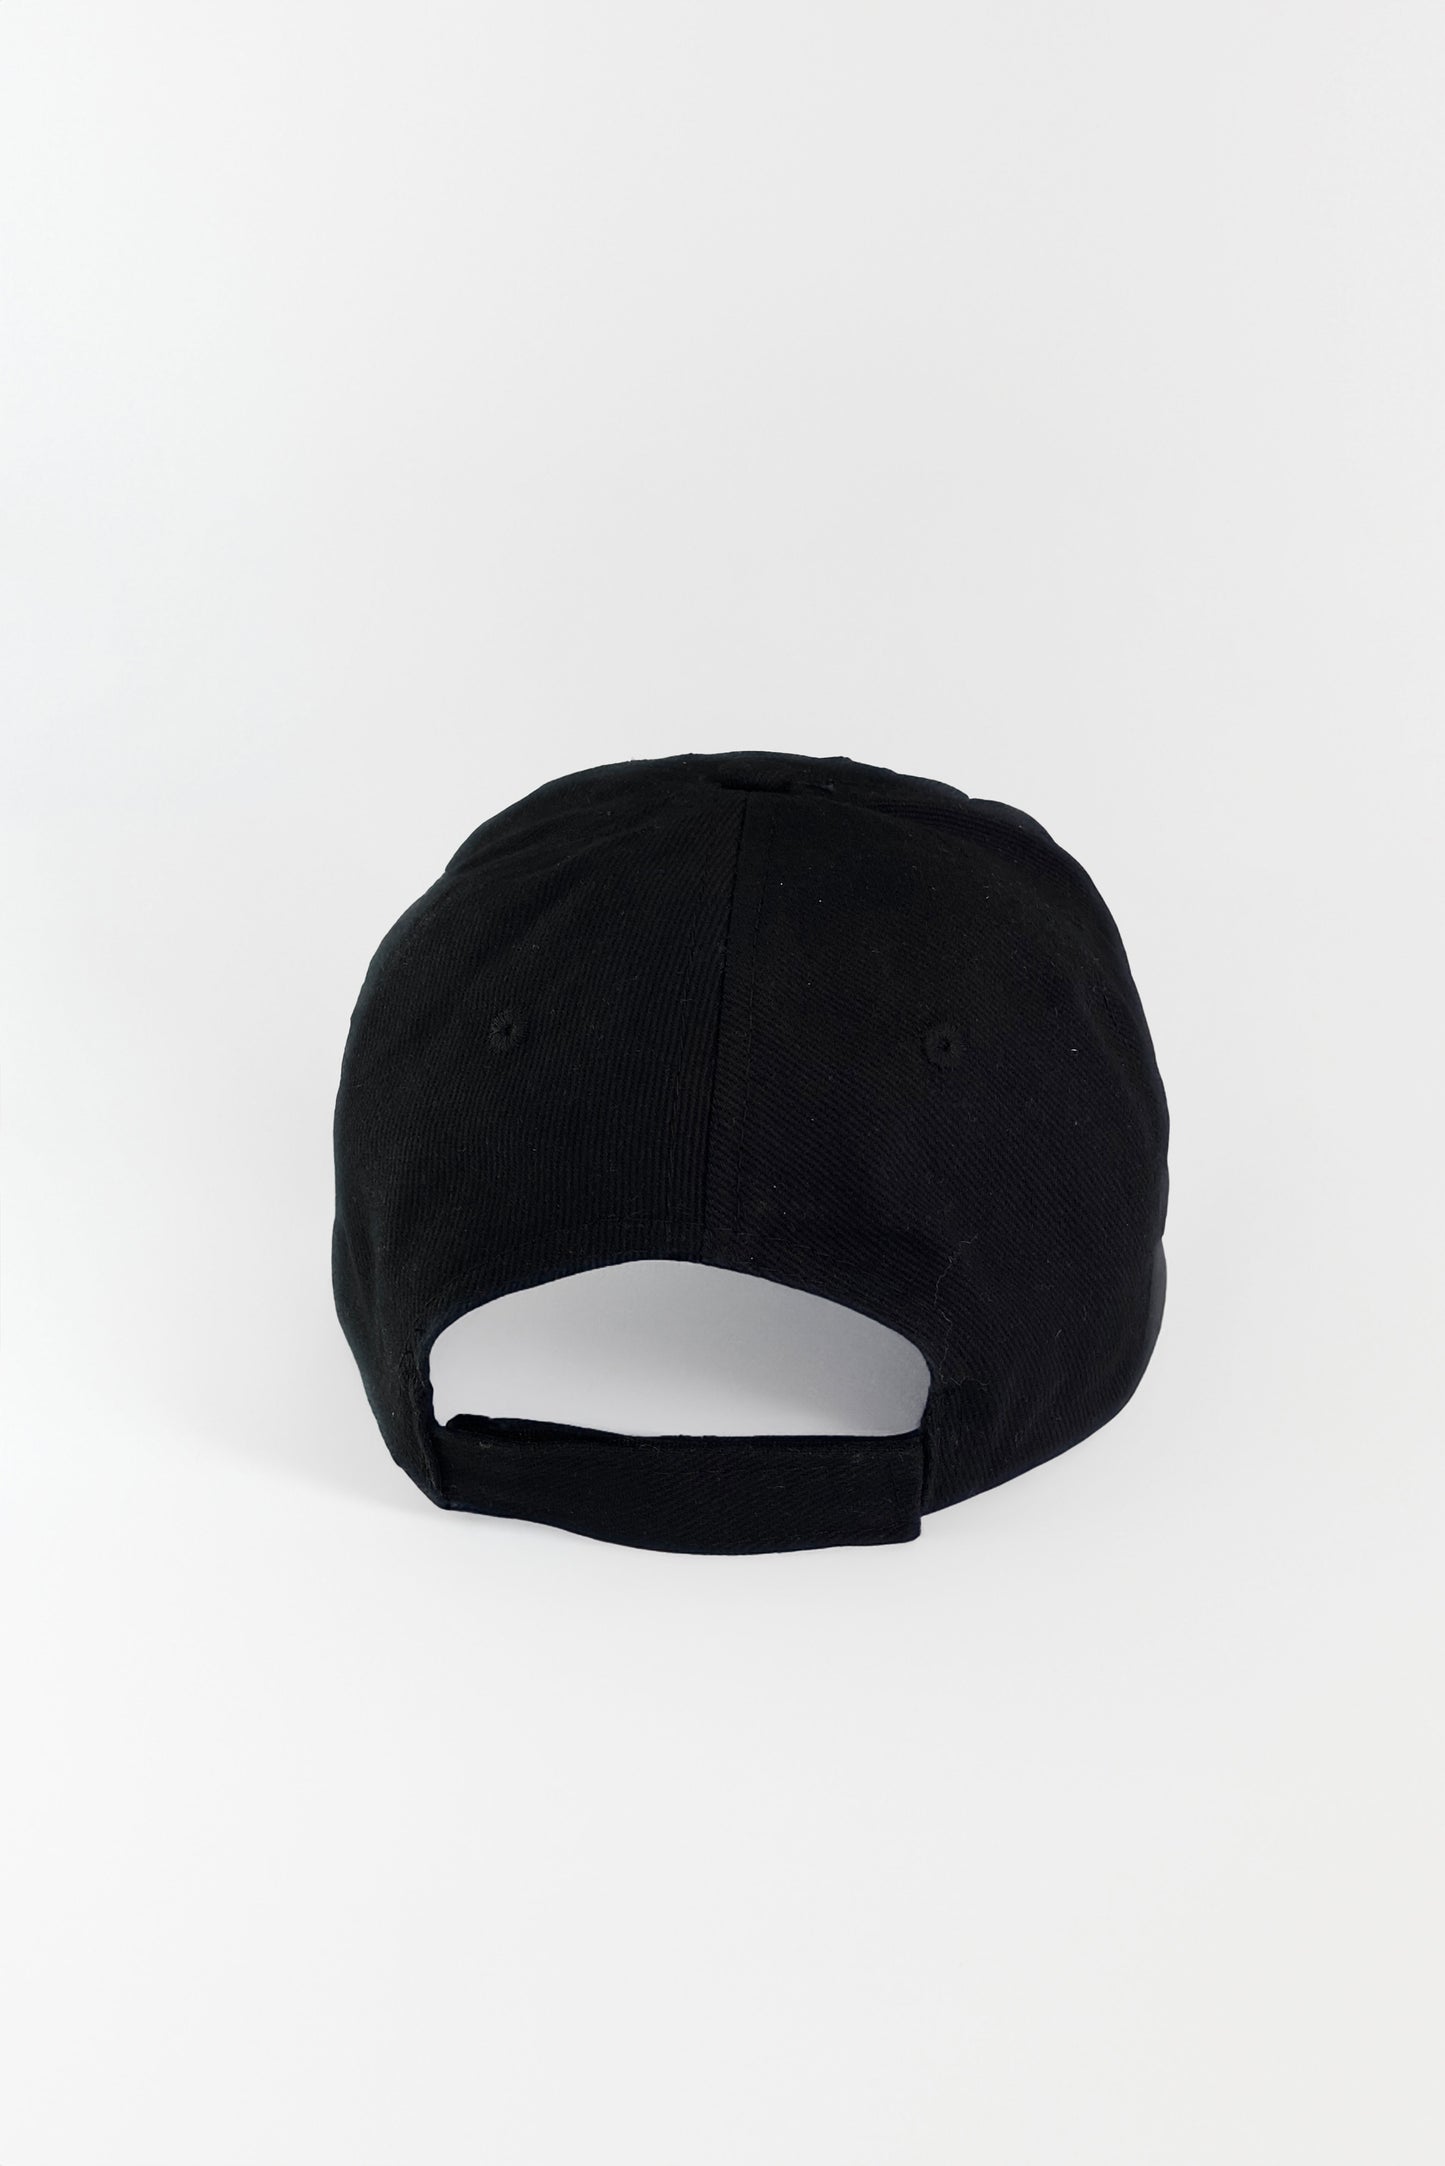 Wild Pony cap with embroidered logo